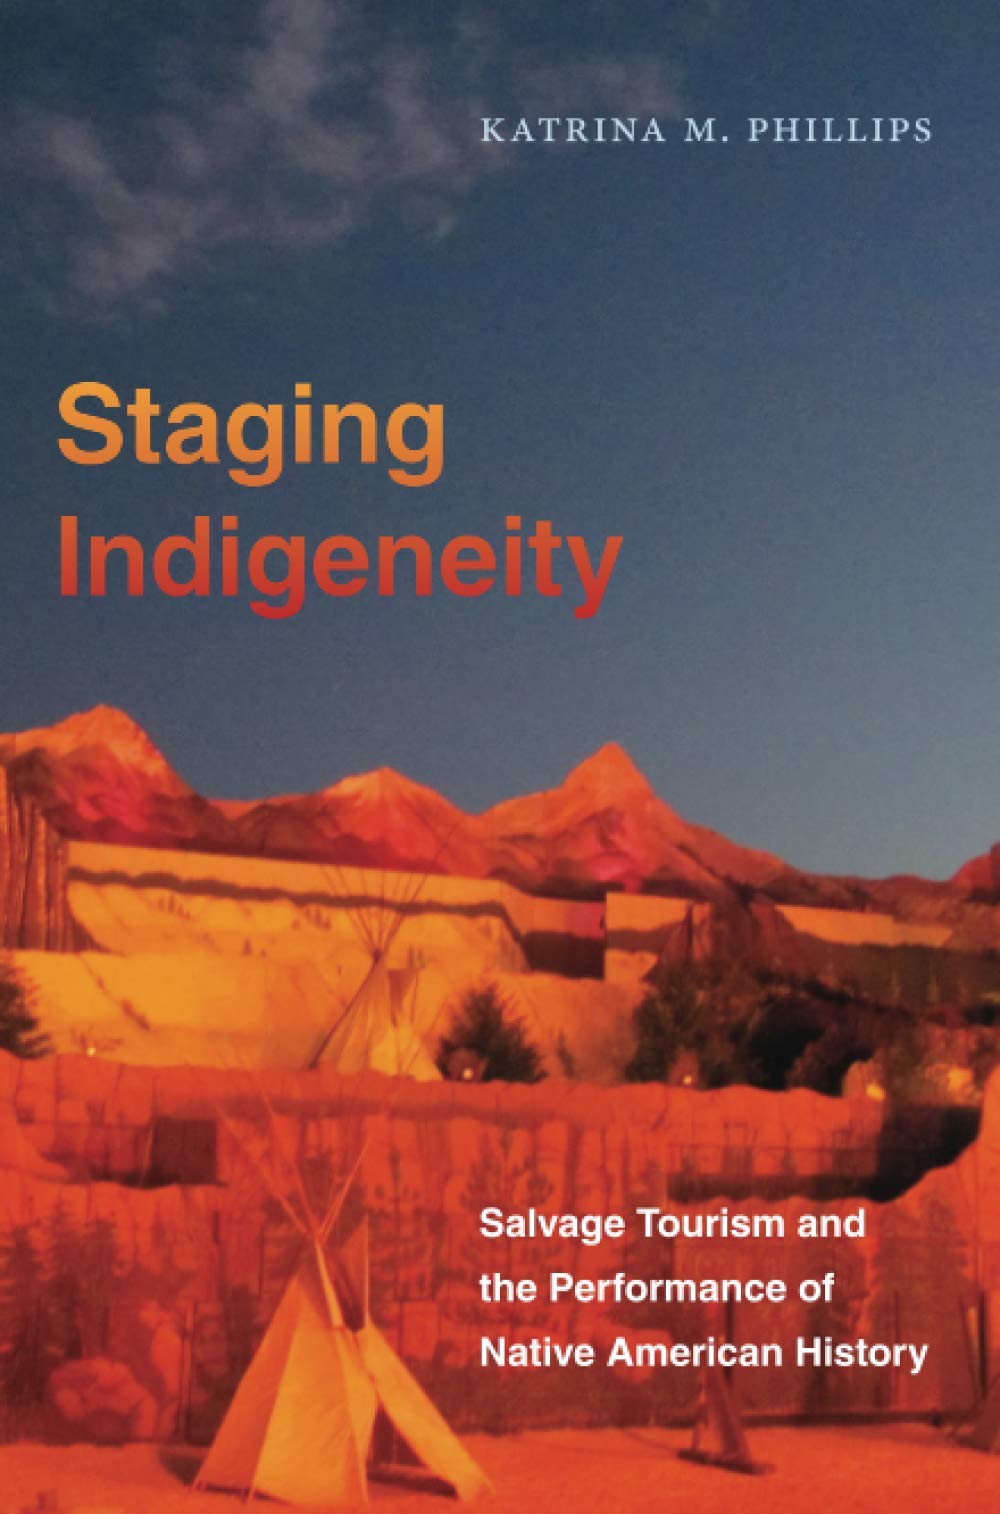 Staging Indigeneity: Salvage Tourism and the Performance of Native American History by Katrina M. Phillips